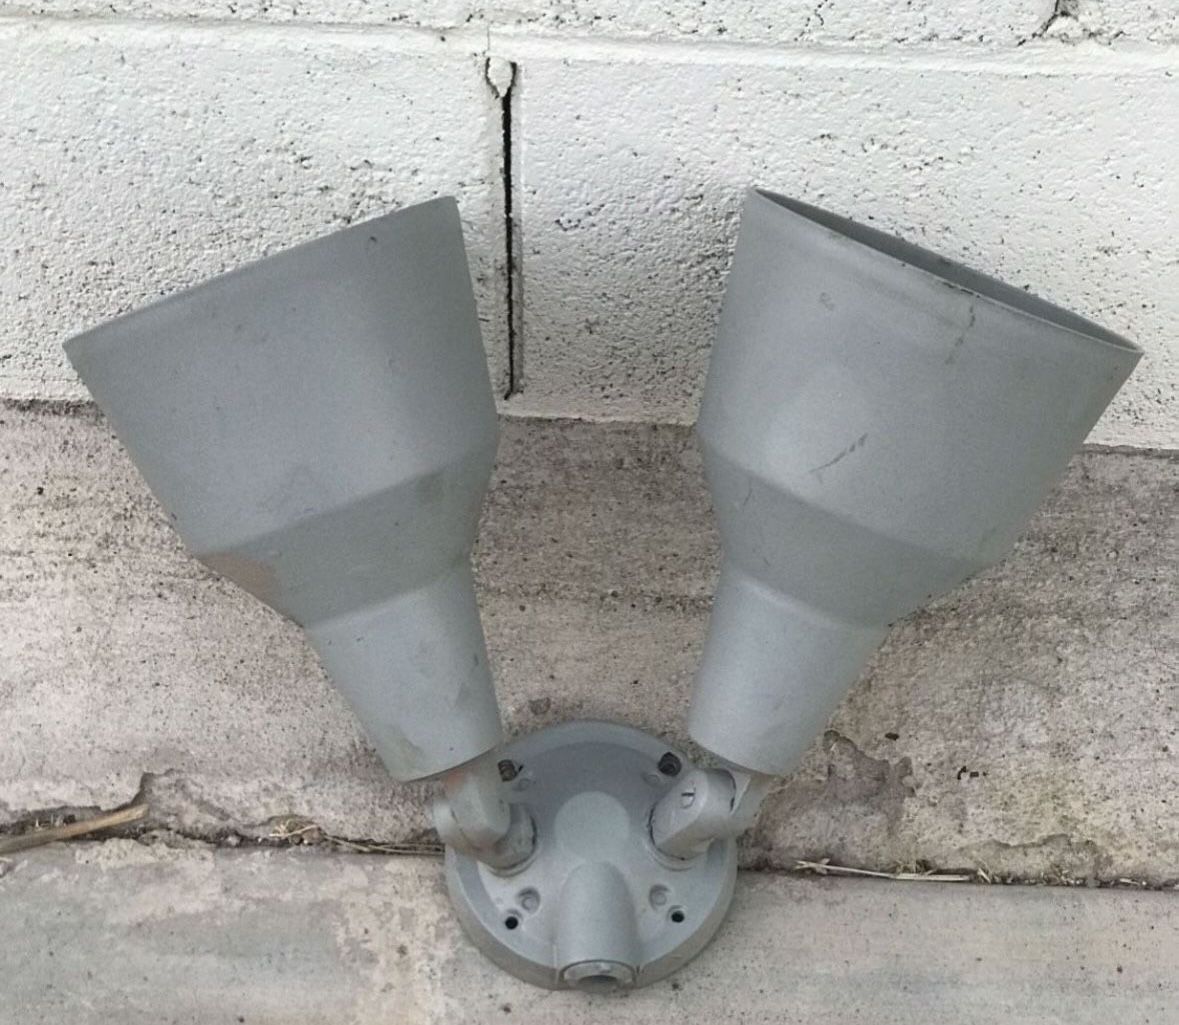 Vintage Gray Metal Industrial Modern Security Flood Wall light fixture for Outdoor Patio Garage Porch